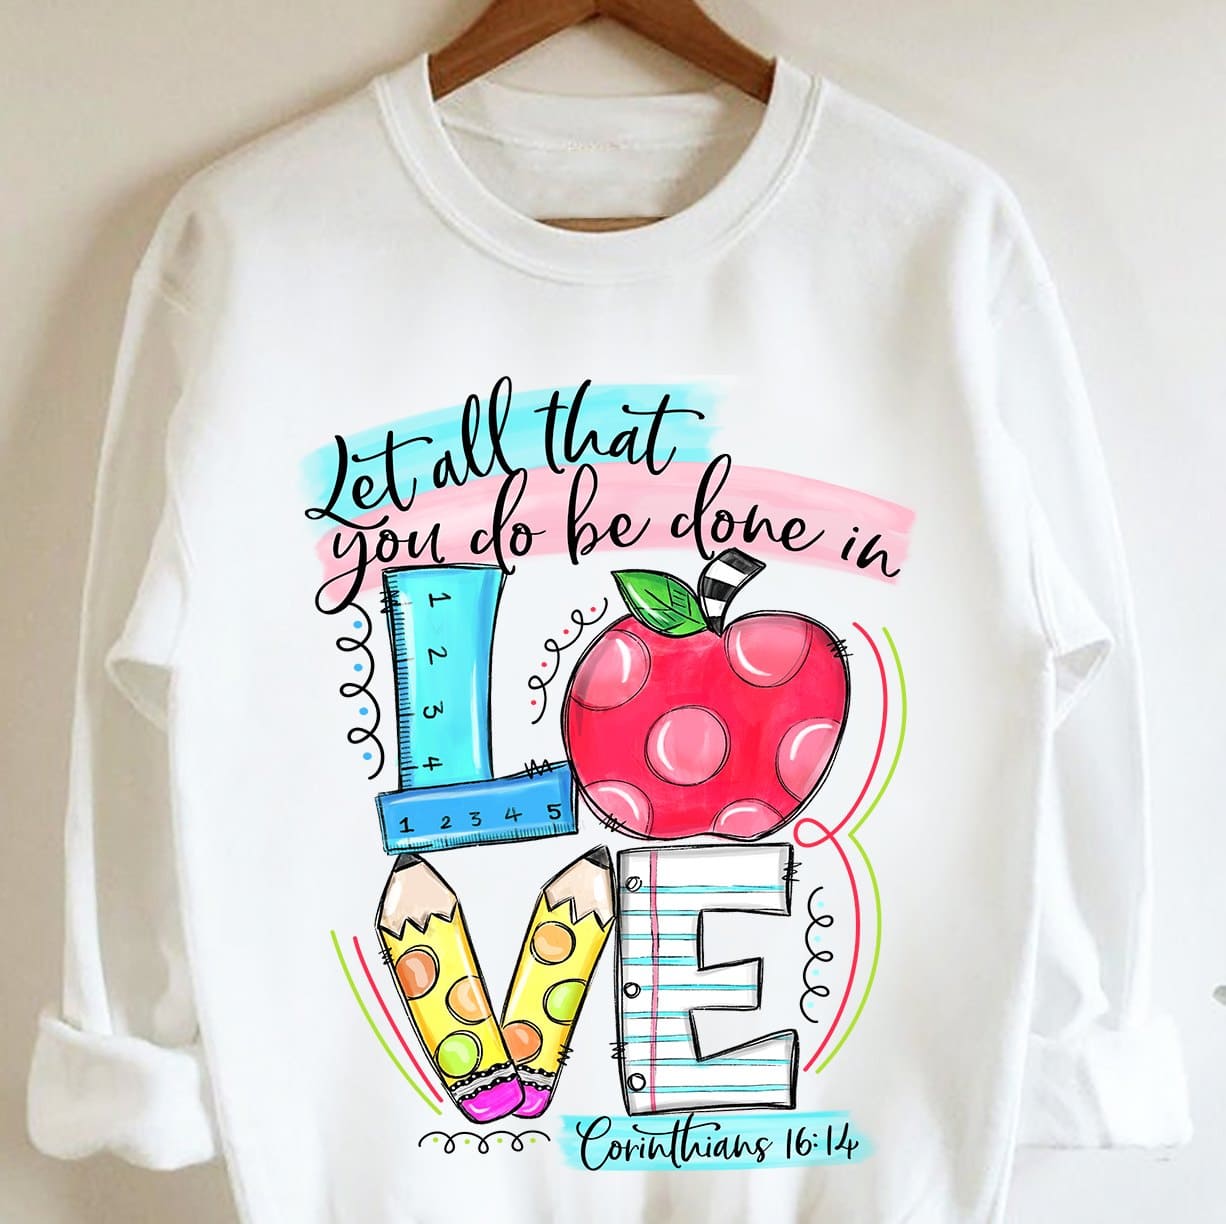 Let all that you do be done in love - T-shirt for teacher, spread love in life